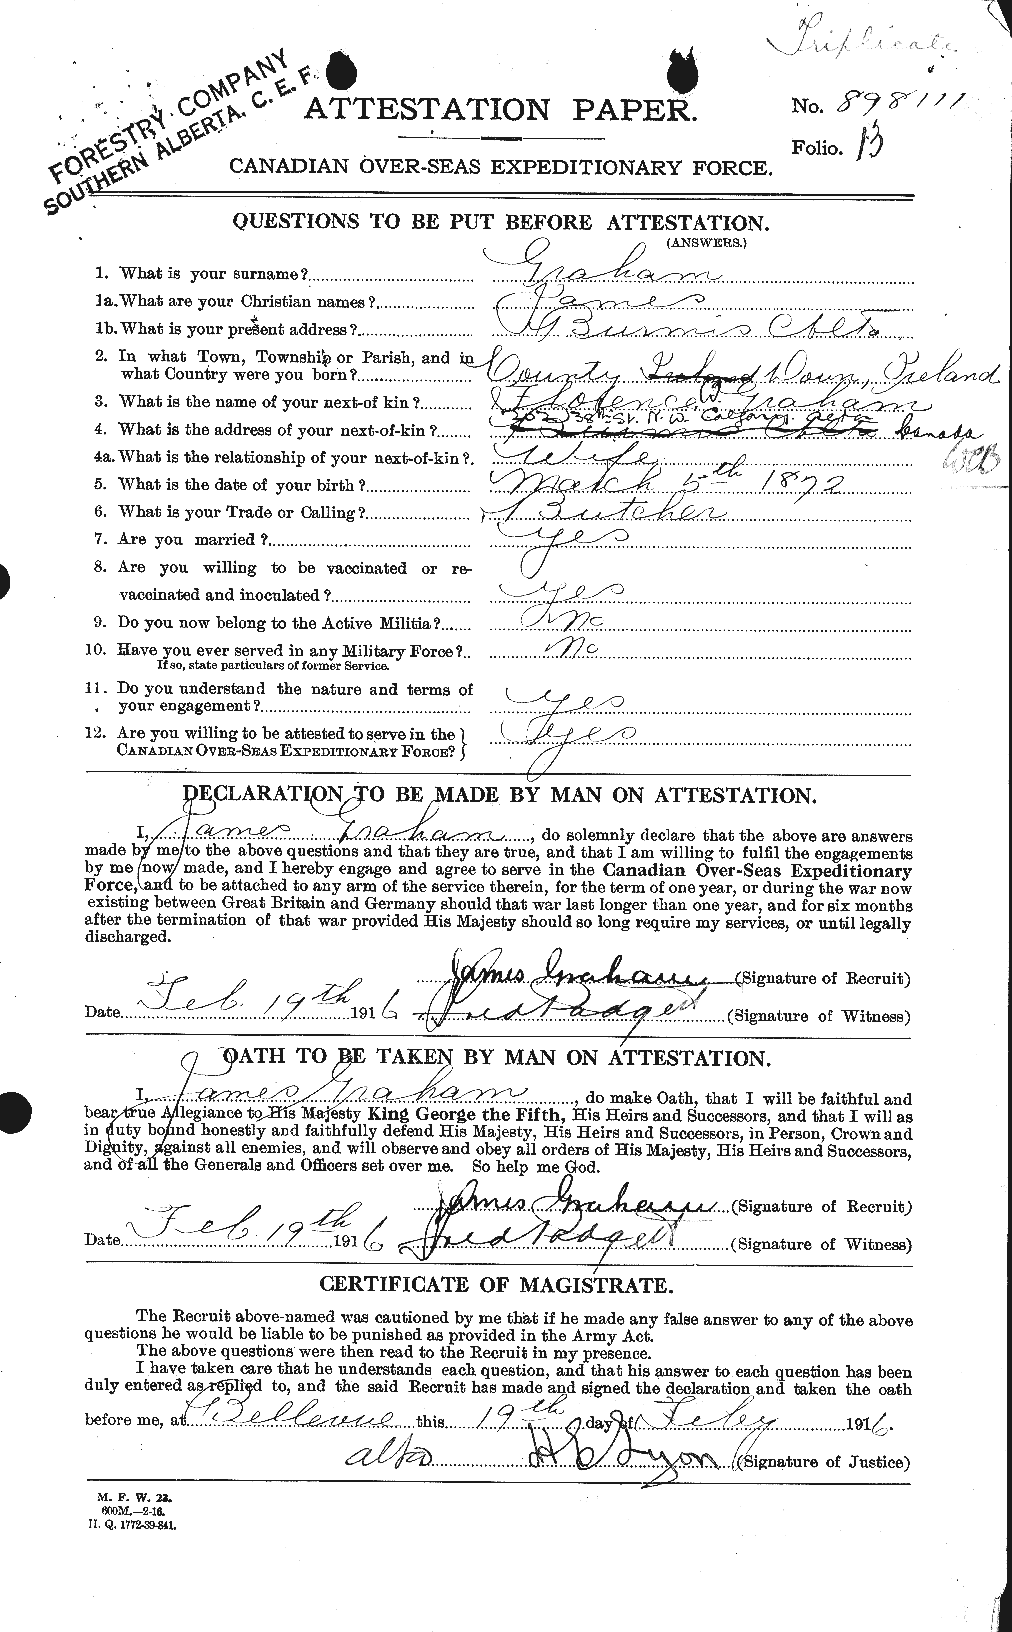 Personnel Records of the First World War - CEF 357796a